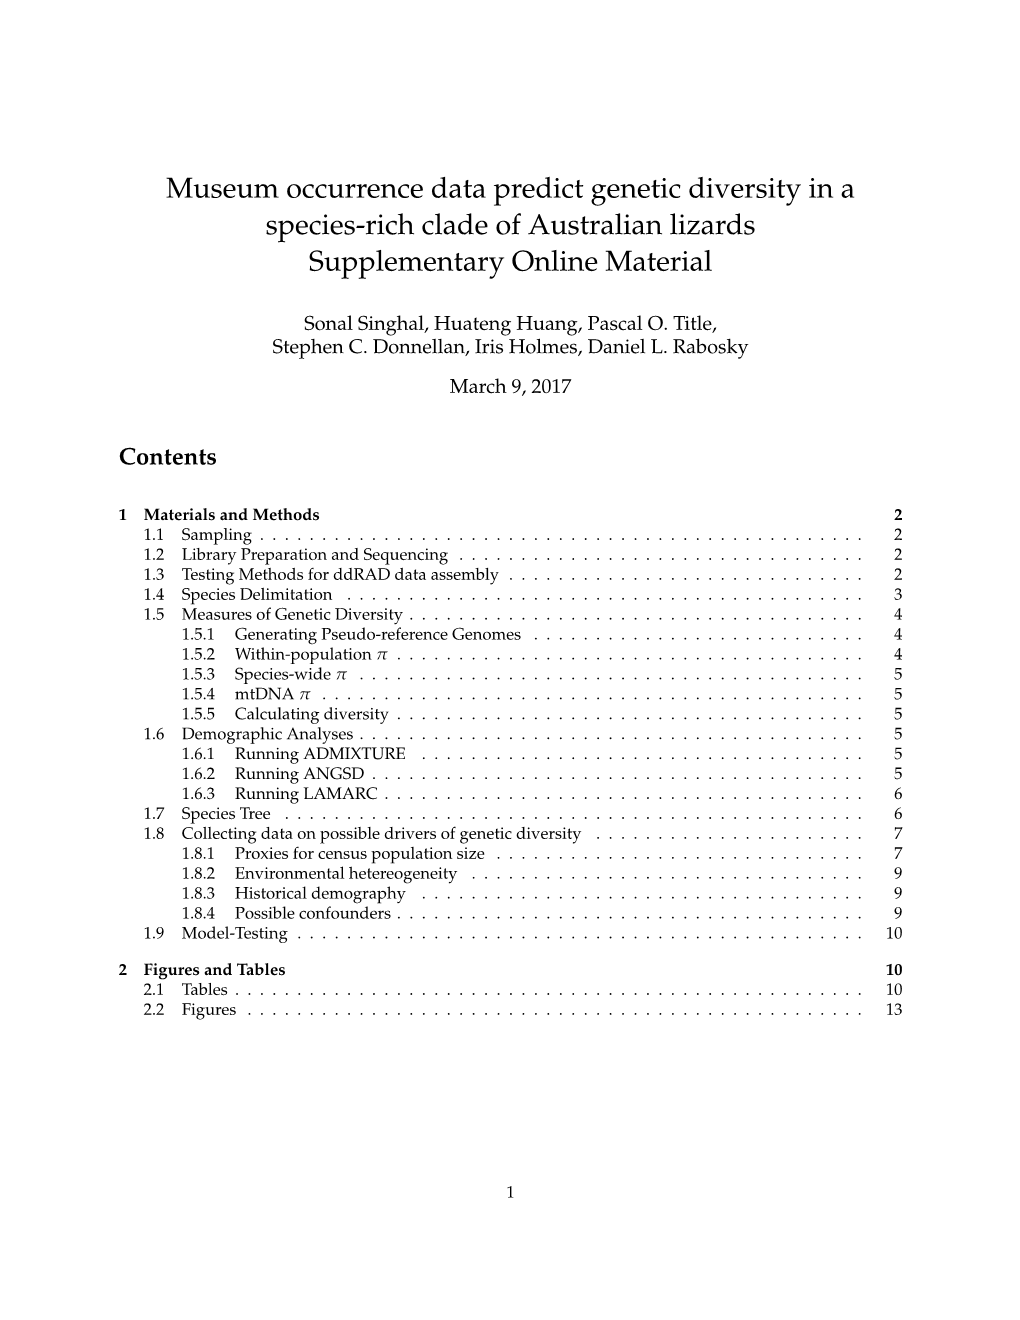 Museum Occurrence Data Predict Genetic Diversity in a Species-Rich Clade of Australian Lizards Supplementary Online Material